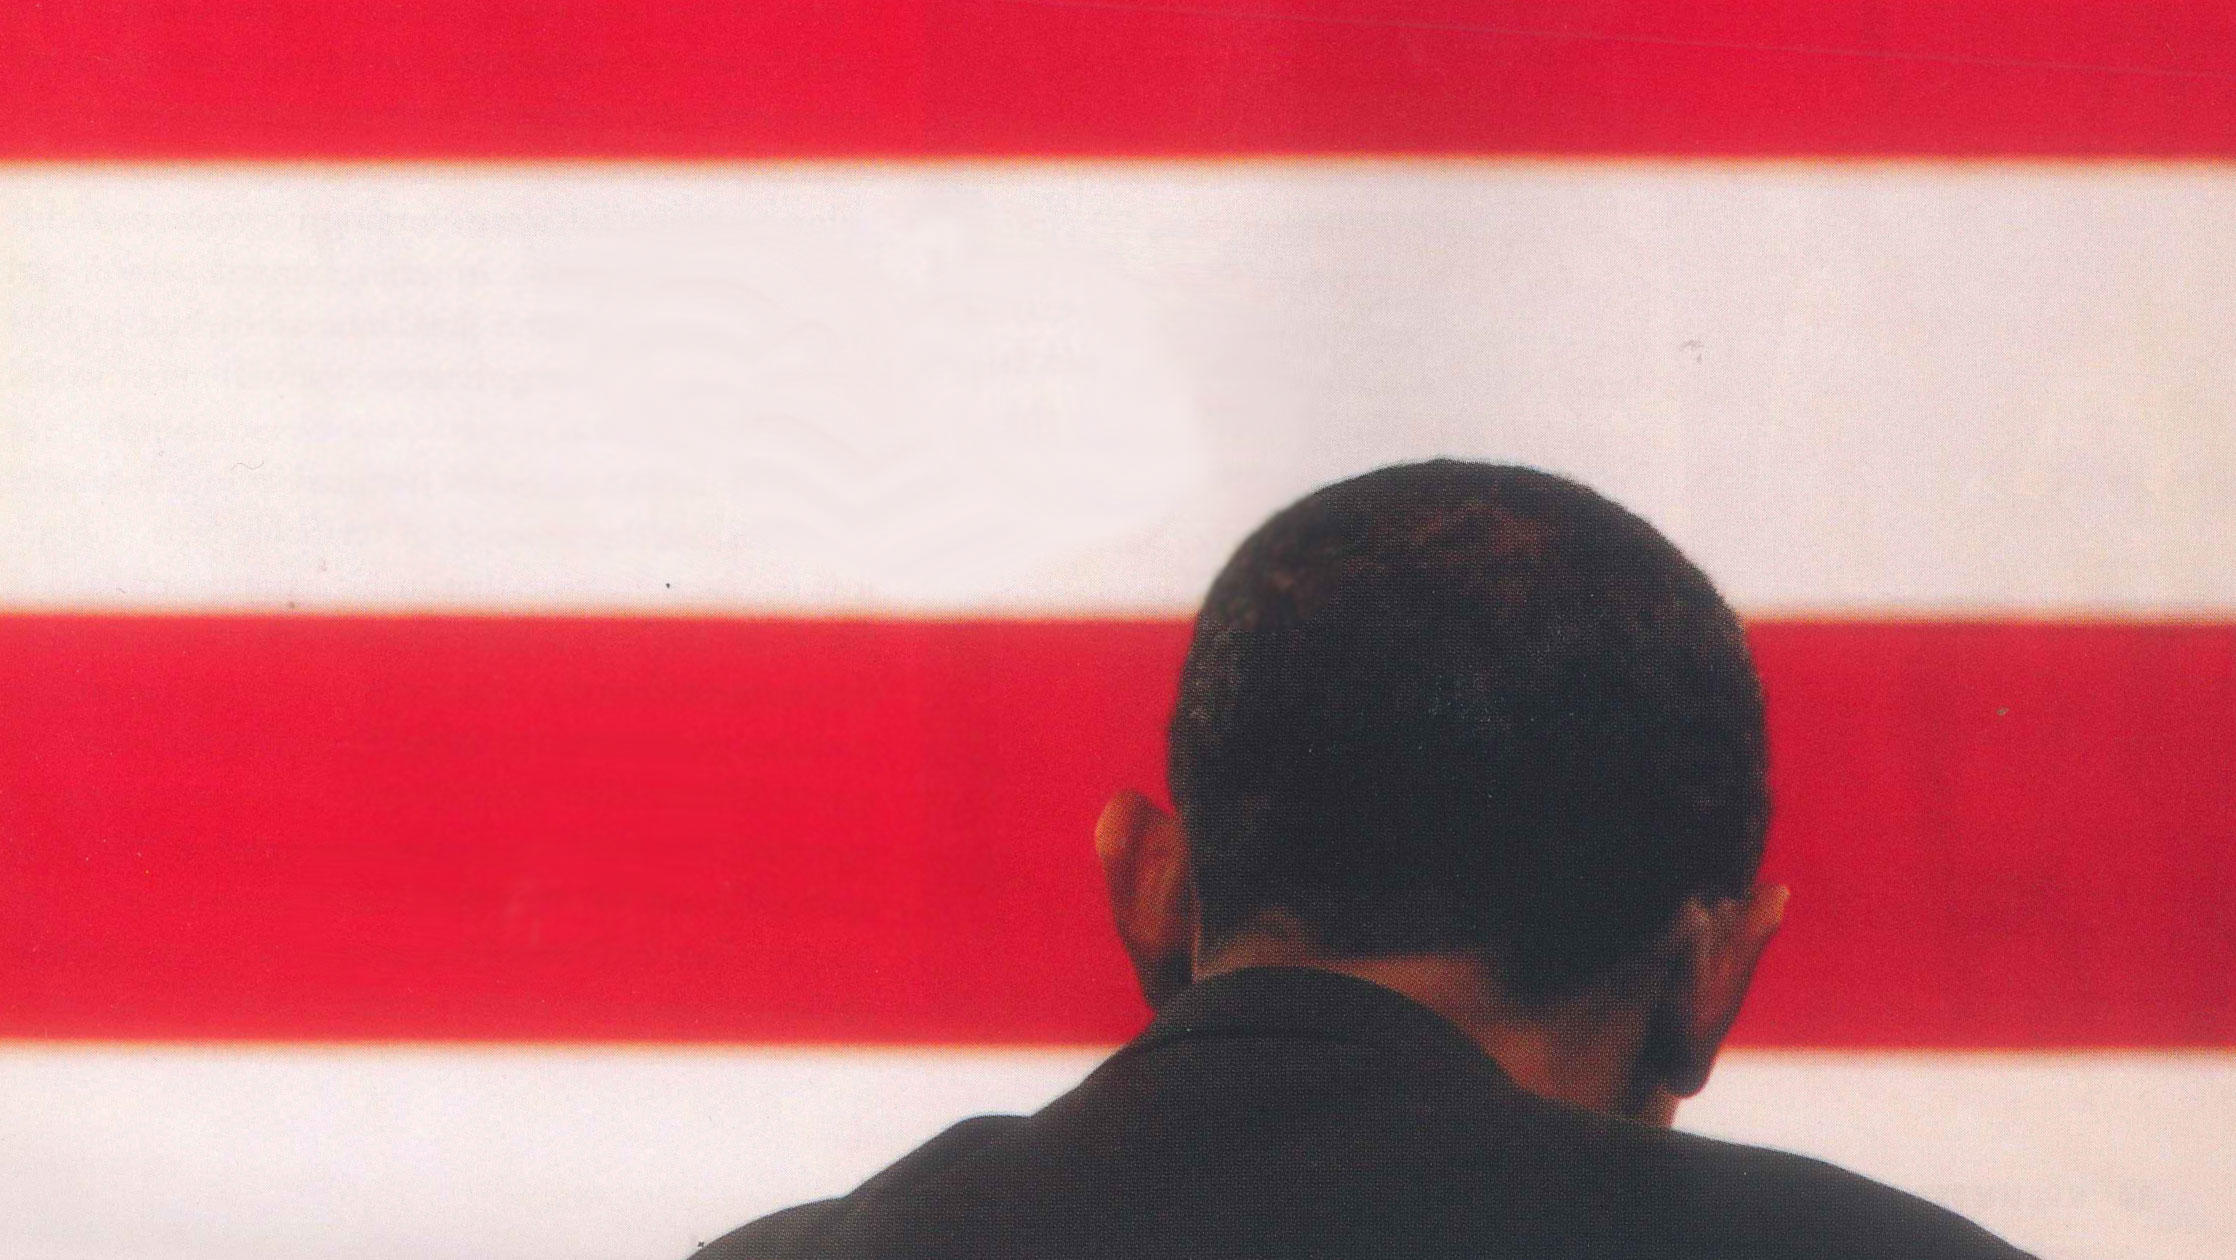 Photograph of the back of Barack Obama's head over American flag stripes